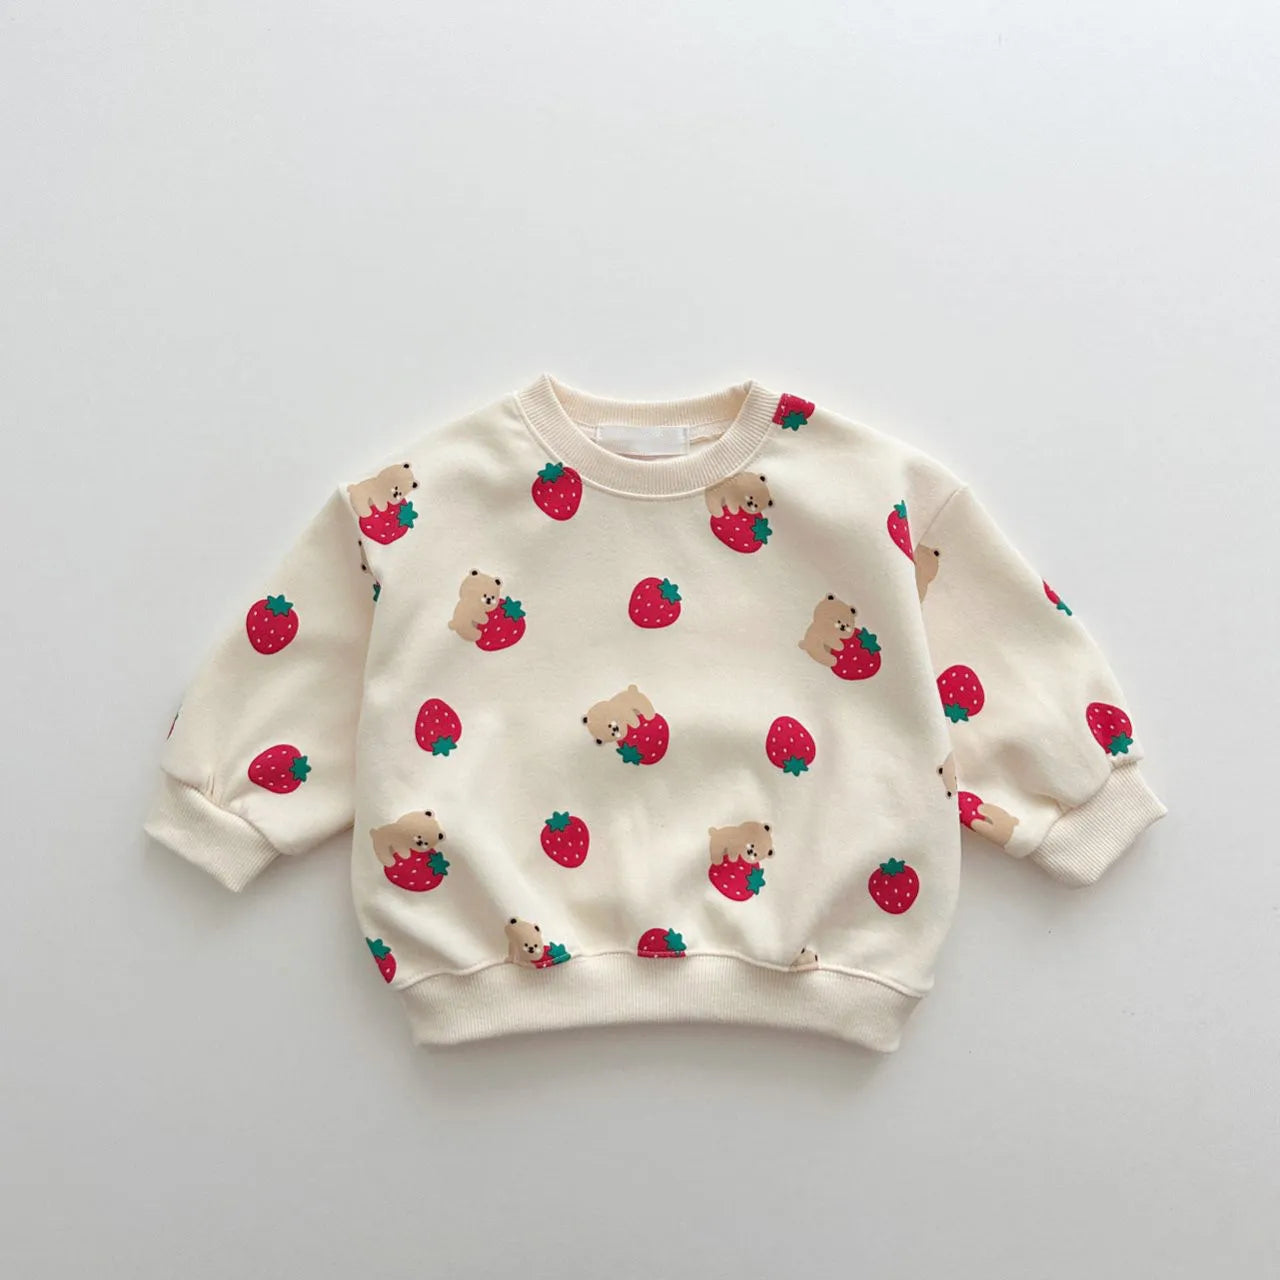 2 Pc Set: Unisex Infant Toddler Strawberry Cotton Sweater and Pants Set